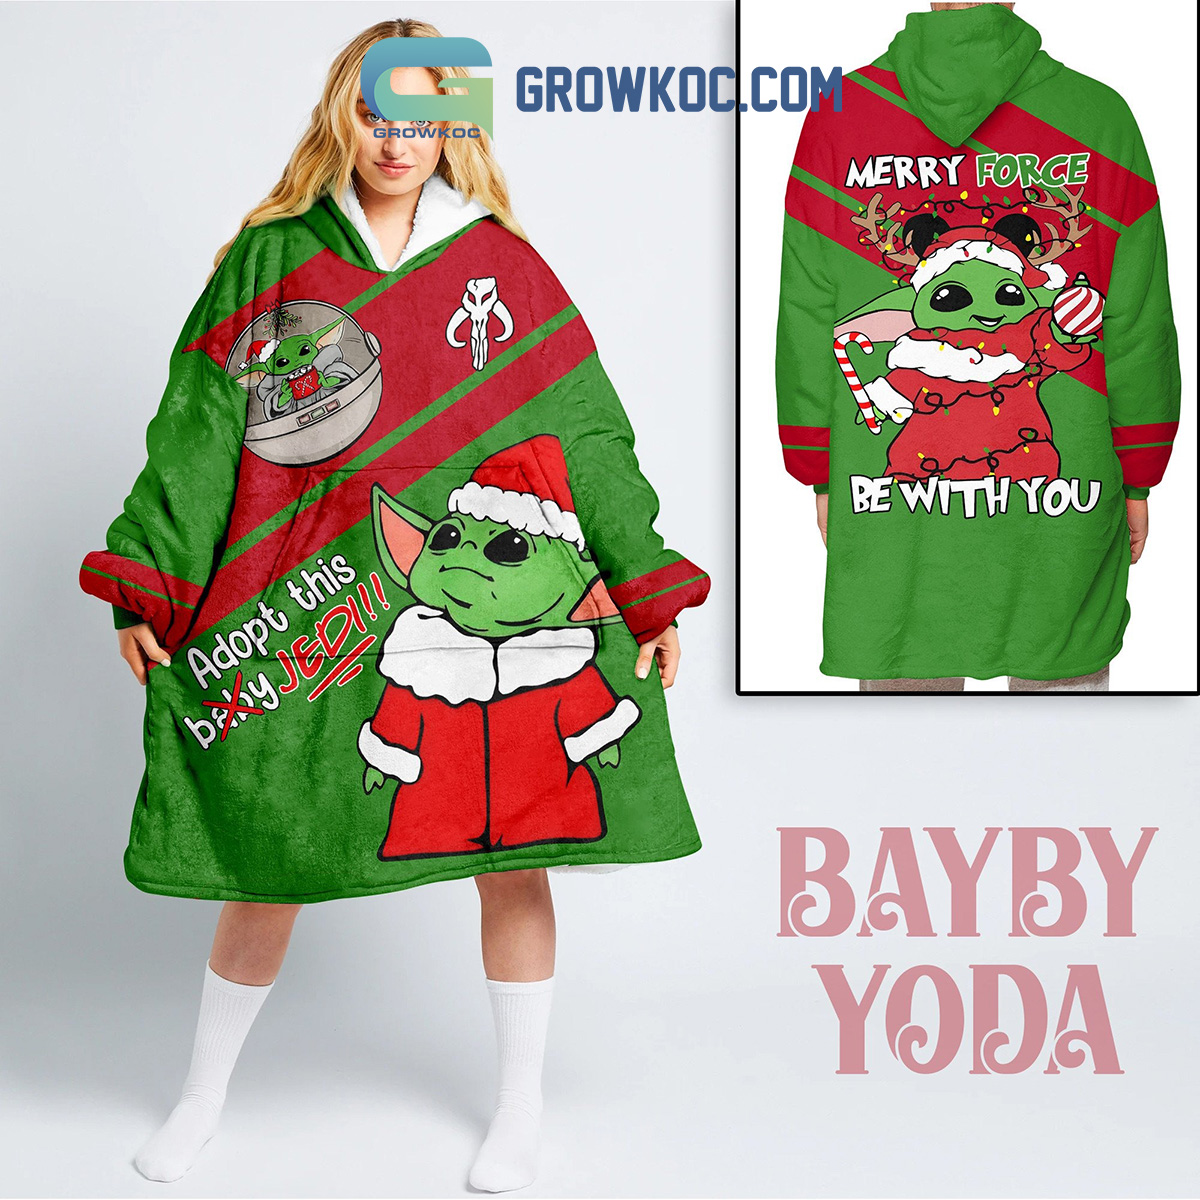 Star Wars Women's Red Yoda Christmas Morning Meme Hoodie Size L NEW Size L  - $27 New With Tags - From Jessica